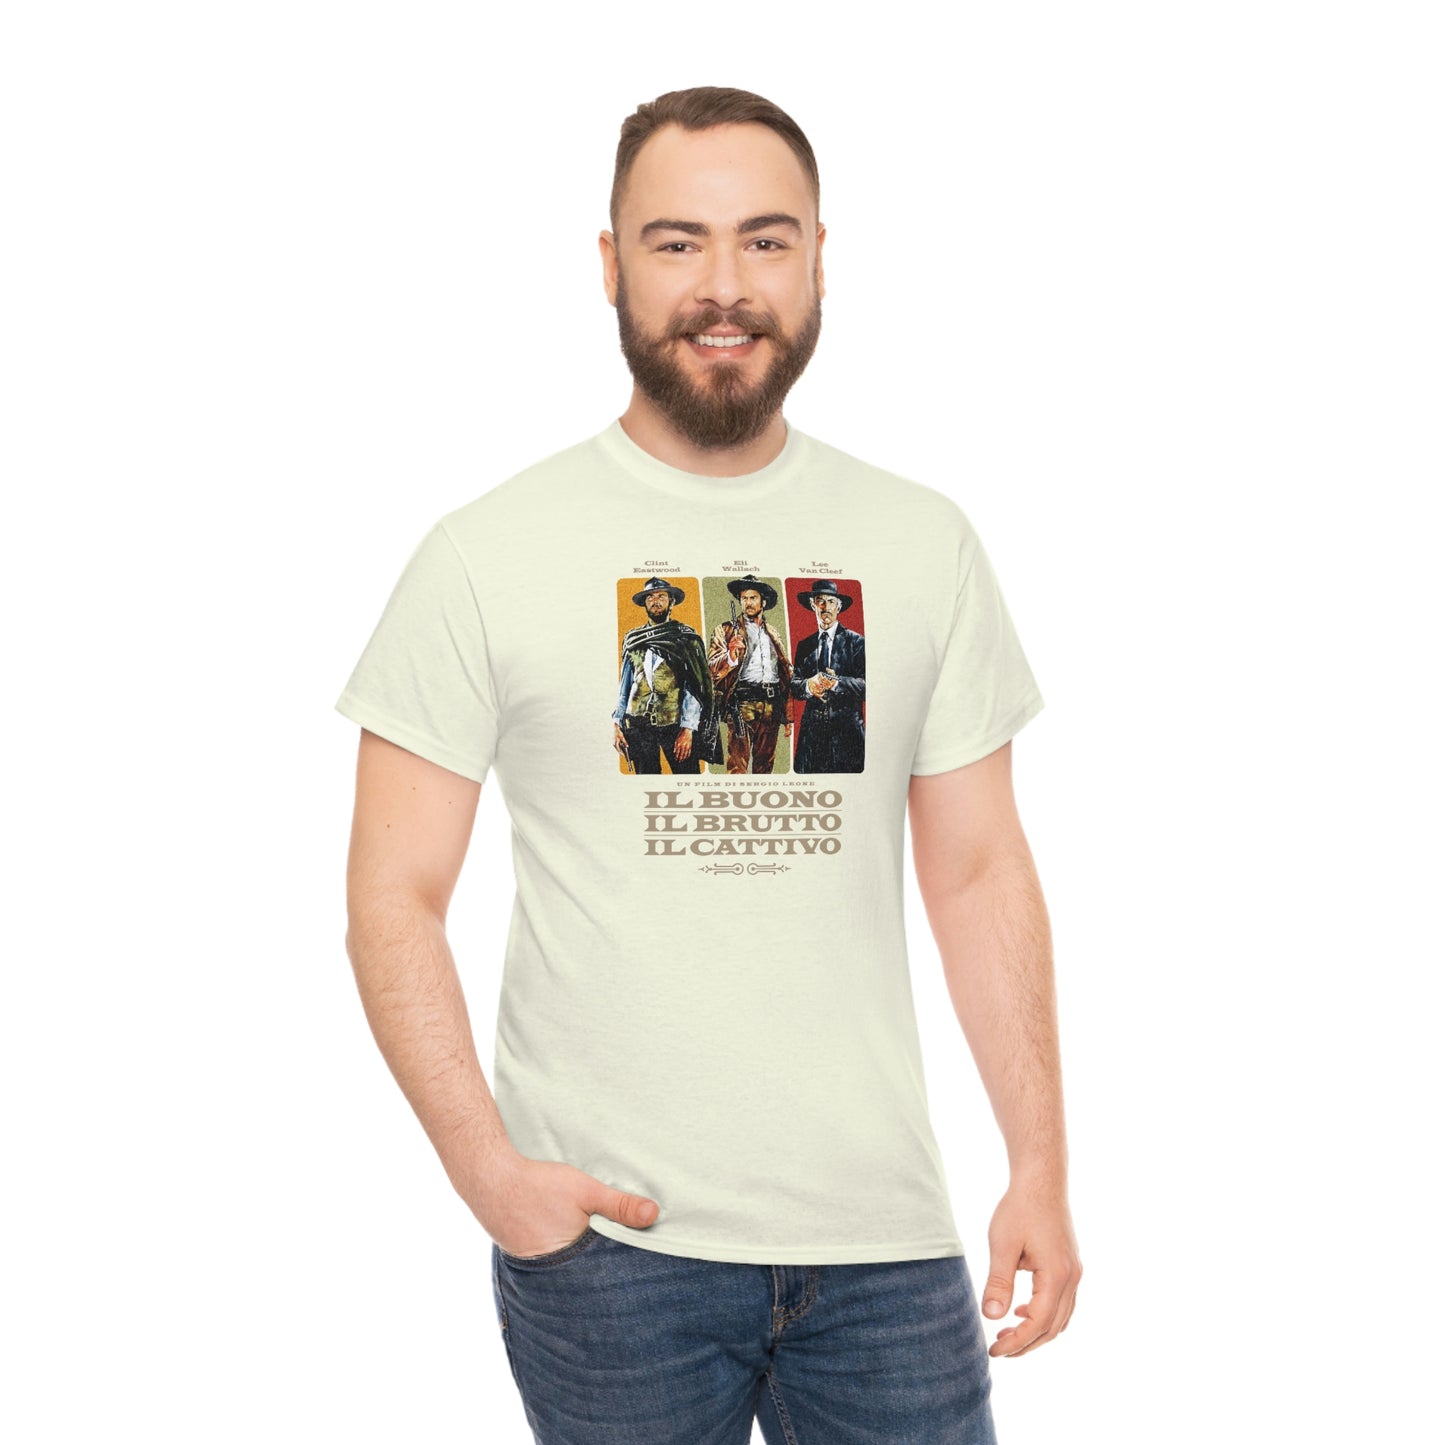 The Good, The Bad and the Ugly T-Shirt